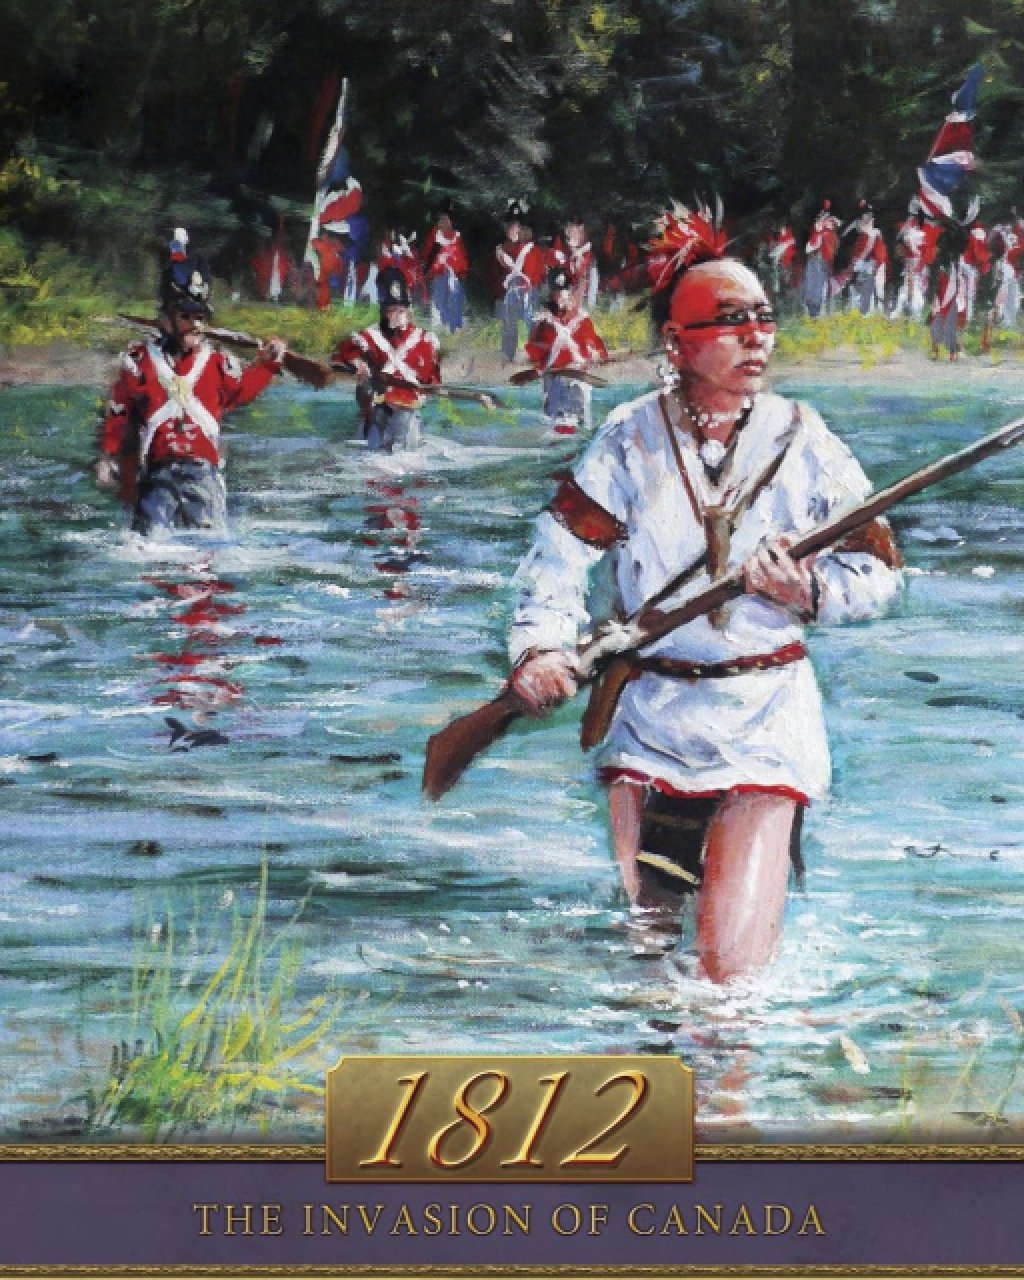 1812 The Invasion of Canada